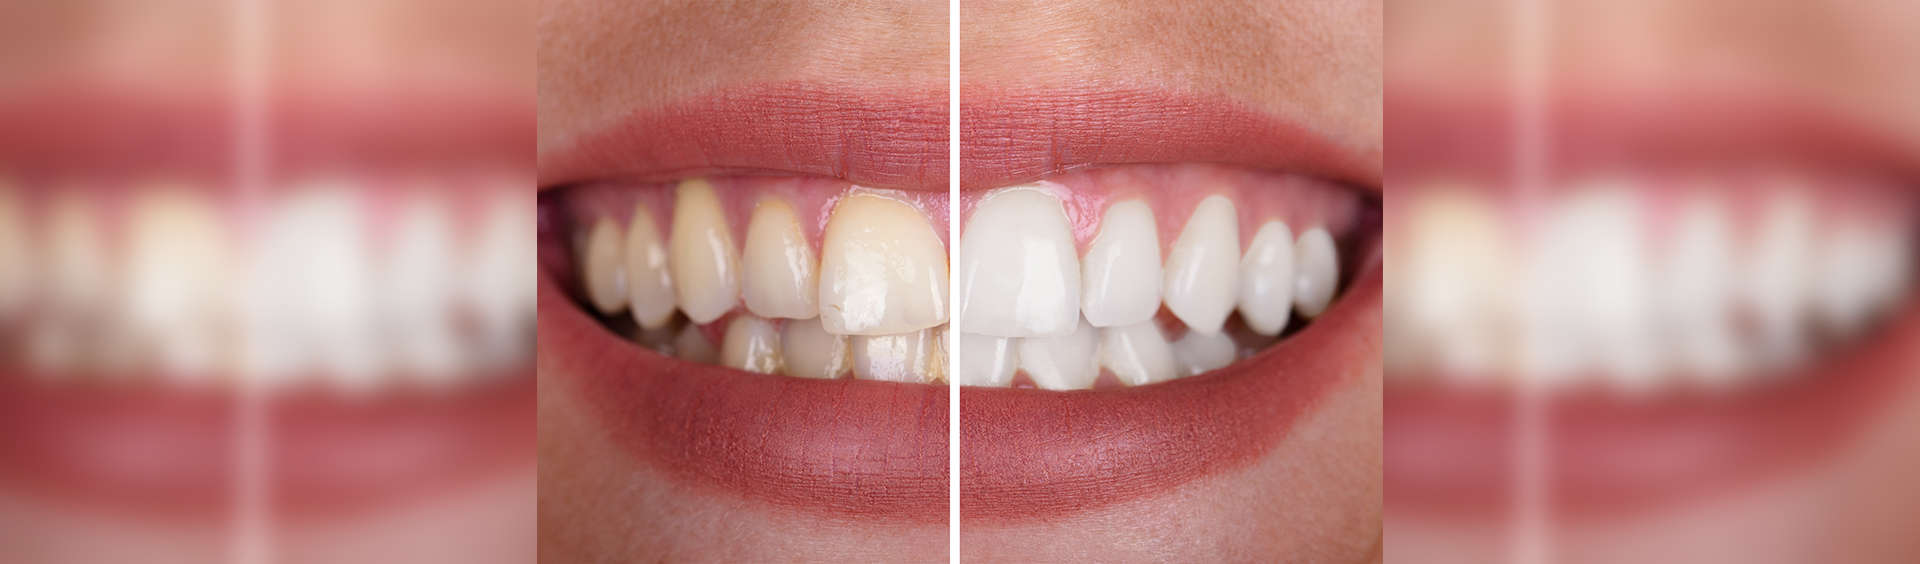 A-Dental Center - tooth whitening